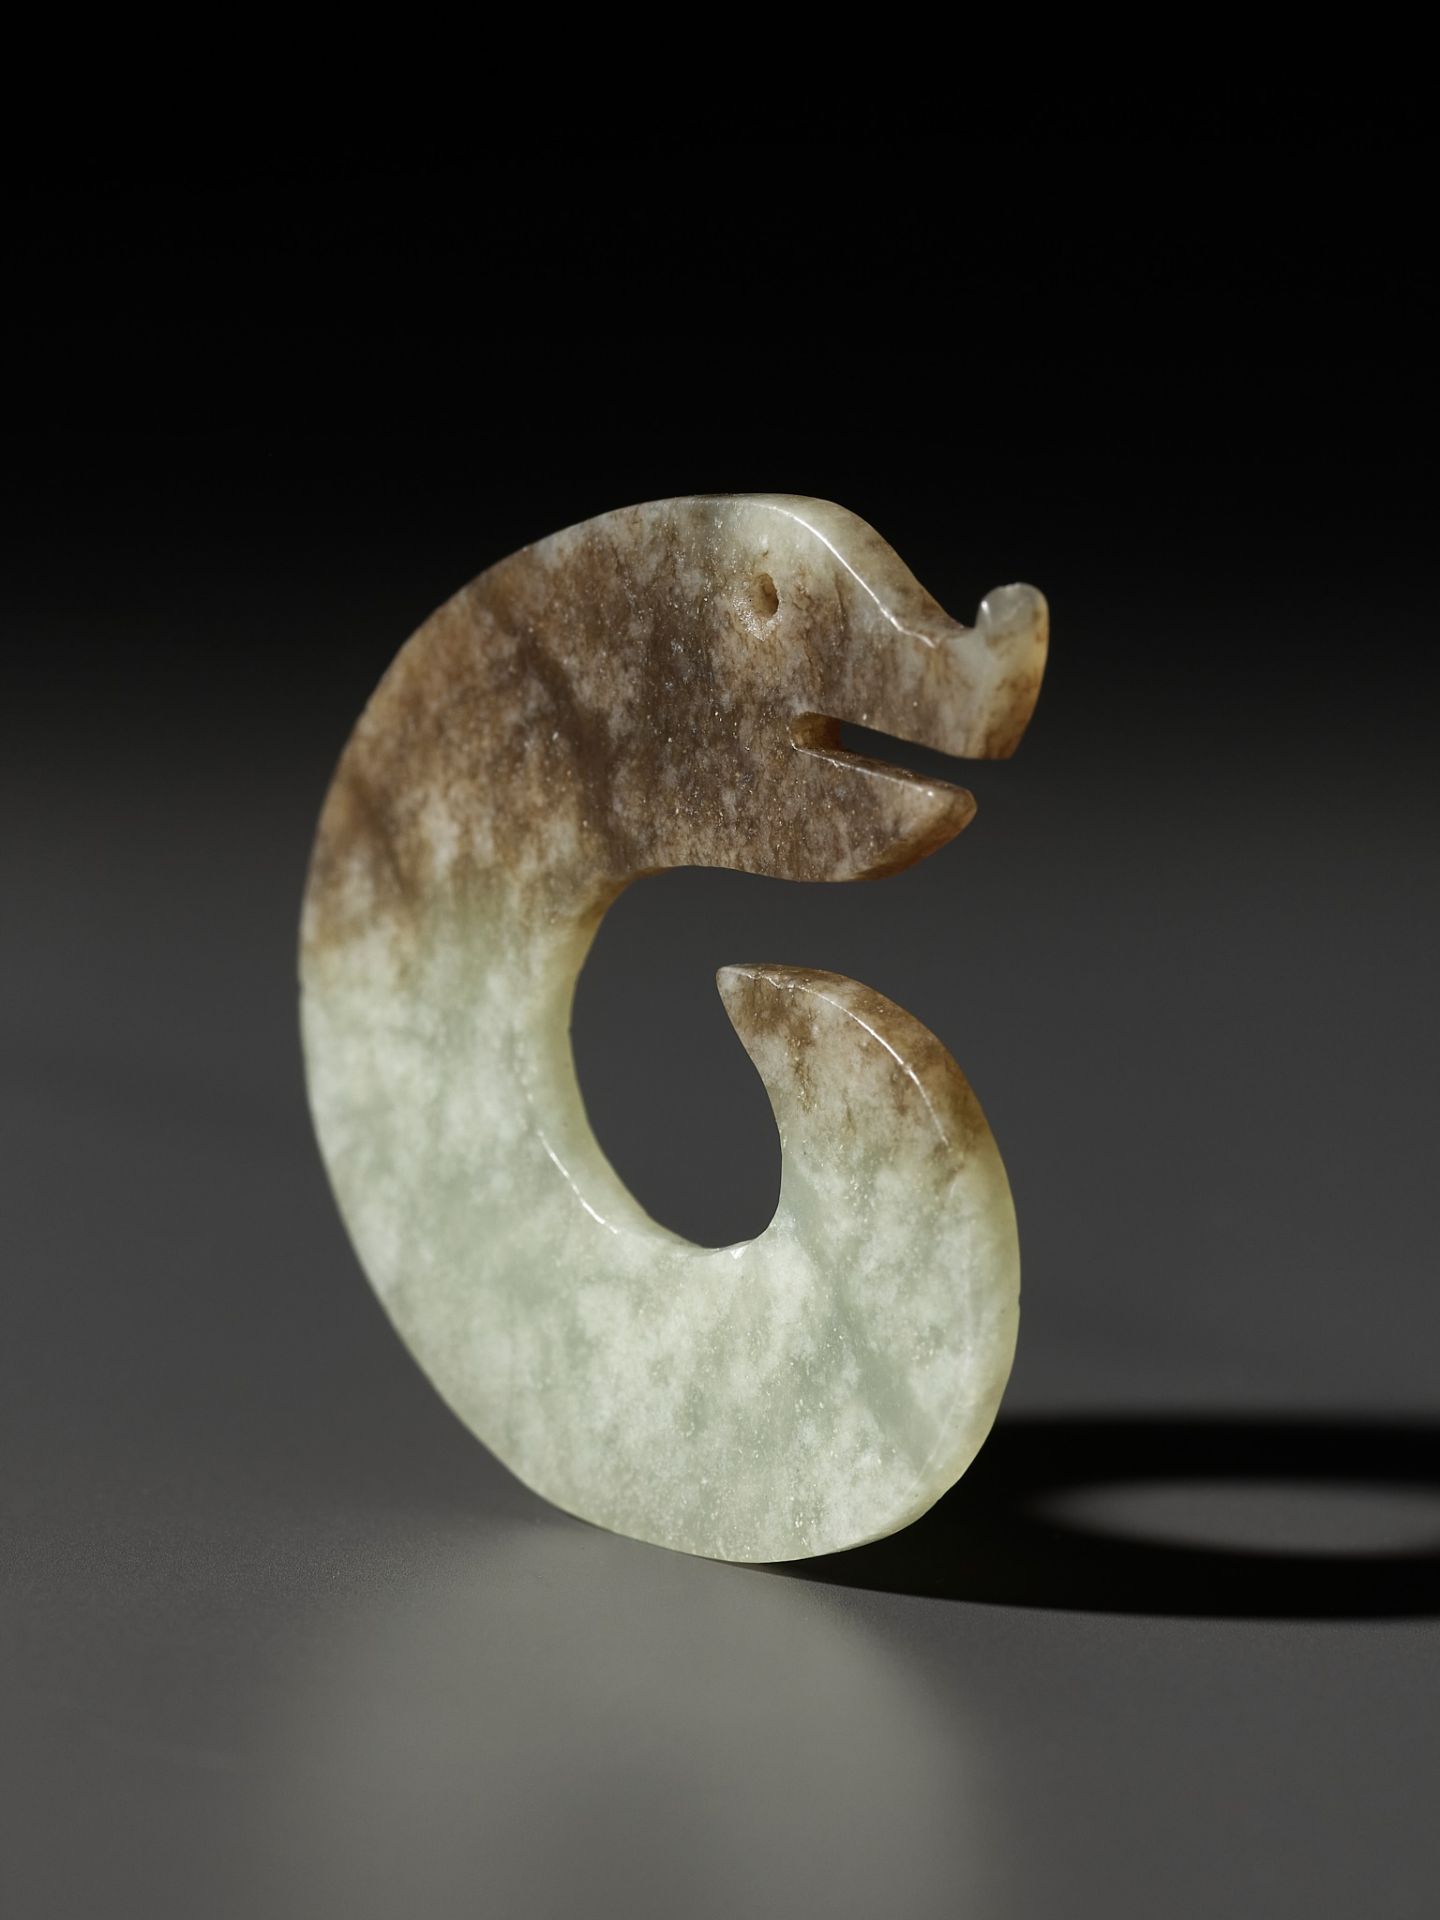 A PAIR OF C-SHAPED 'DRAGON' PENDANTS, ERLITOU PERIOD TO SHANG DYNASTY - Image 5 of 9